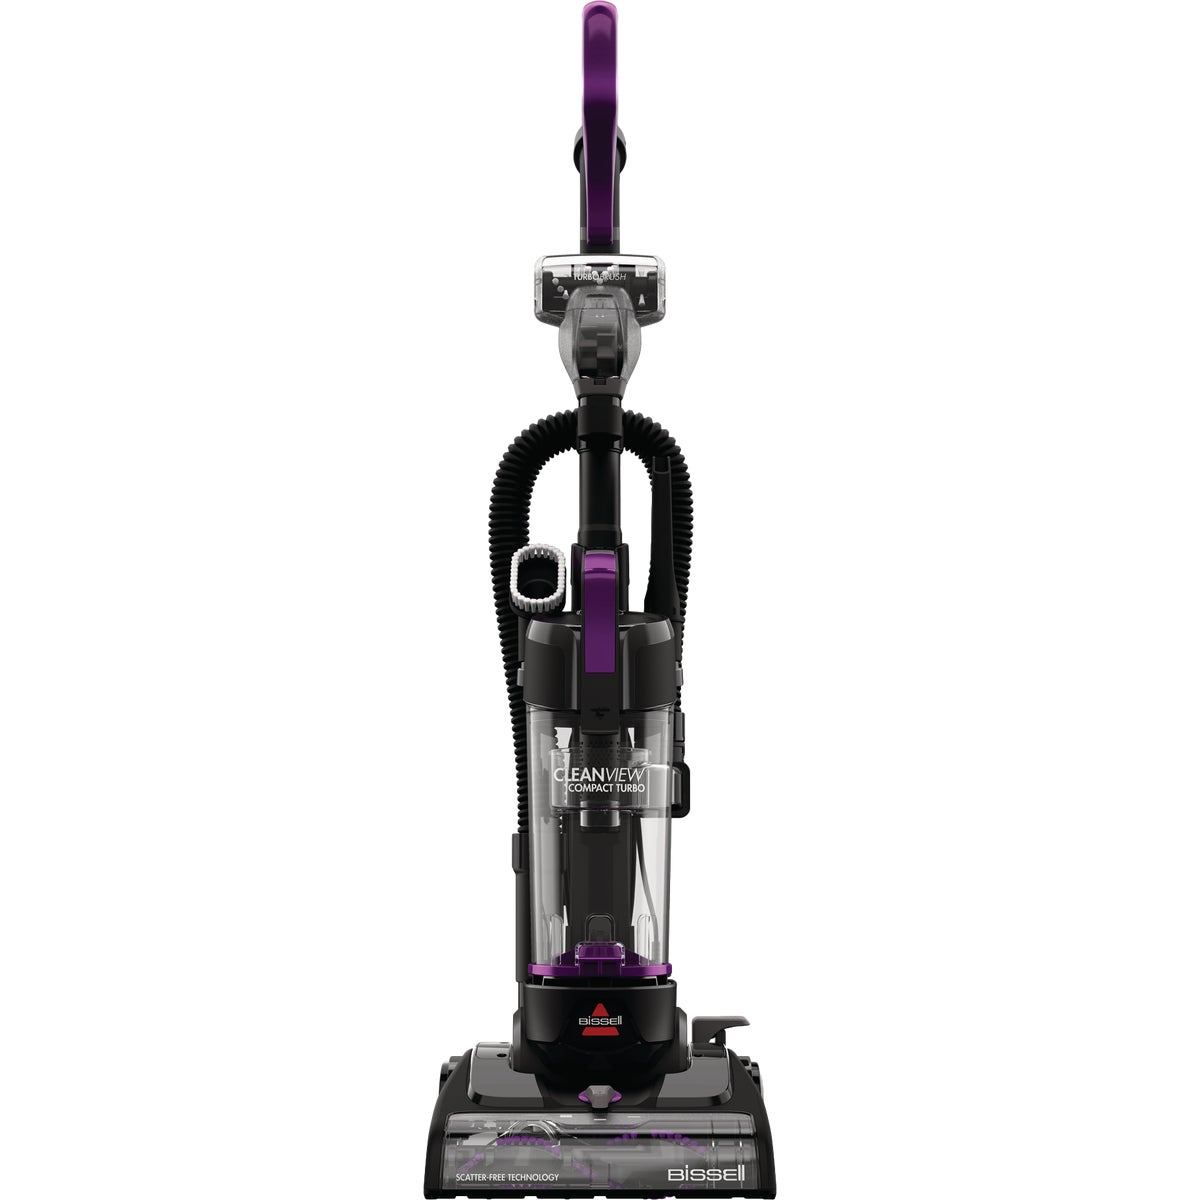 Bissell CleanView Compact Turbo Upright Vacuum Cleaner